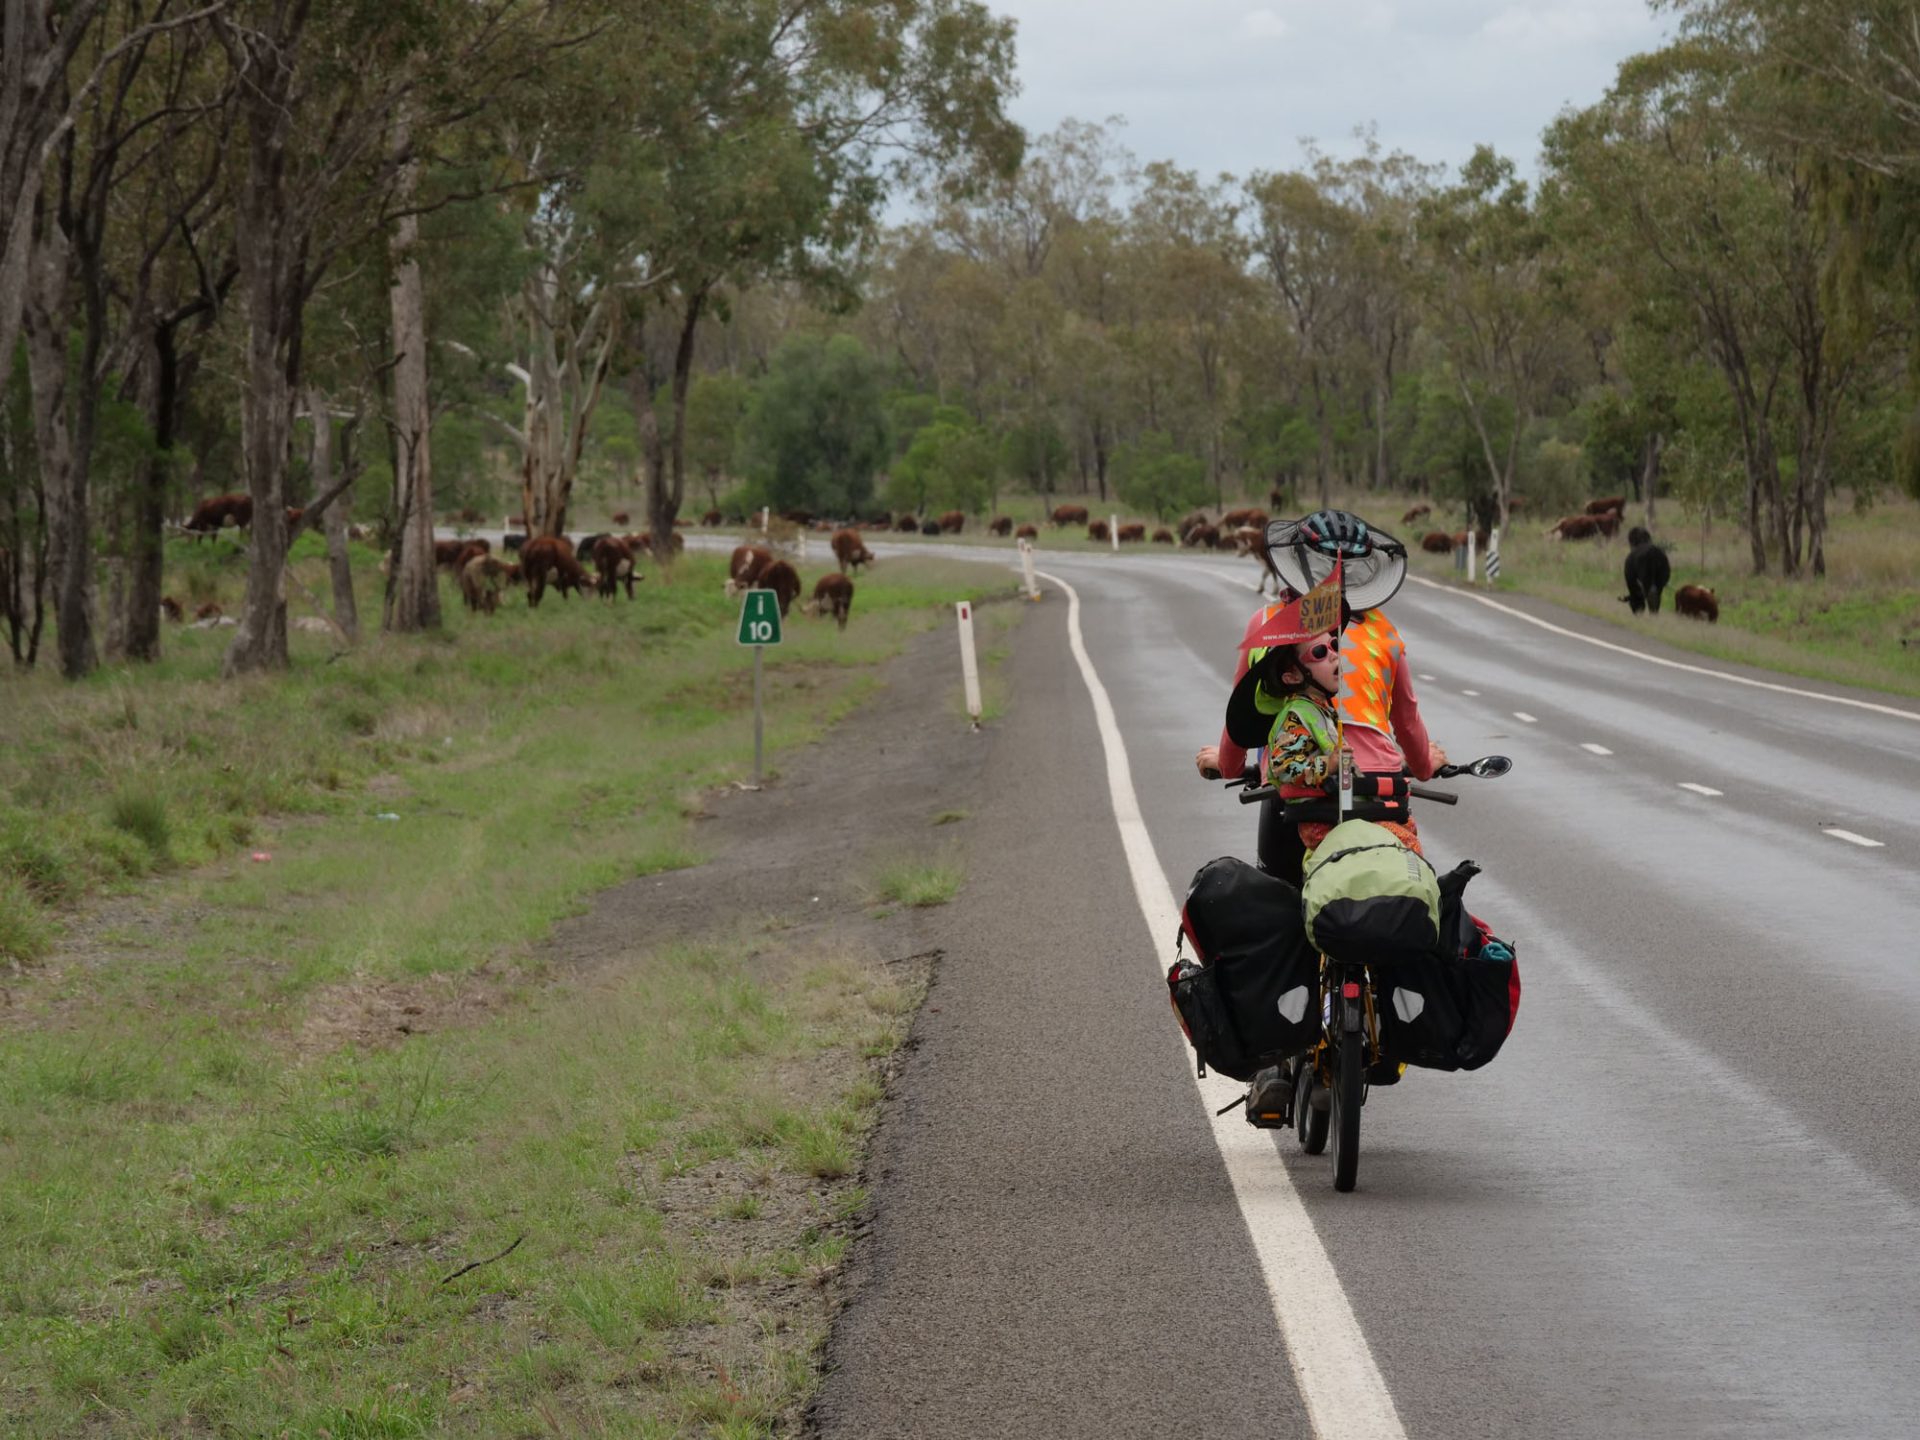 Nicola and Wilfy ride along a paved road through lush countryside, toward cows grazing on either side of the road. 